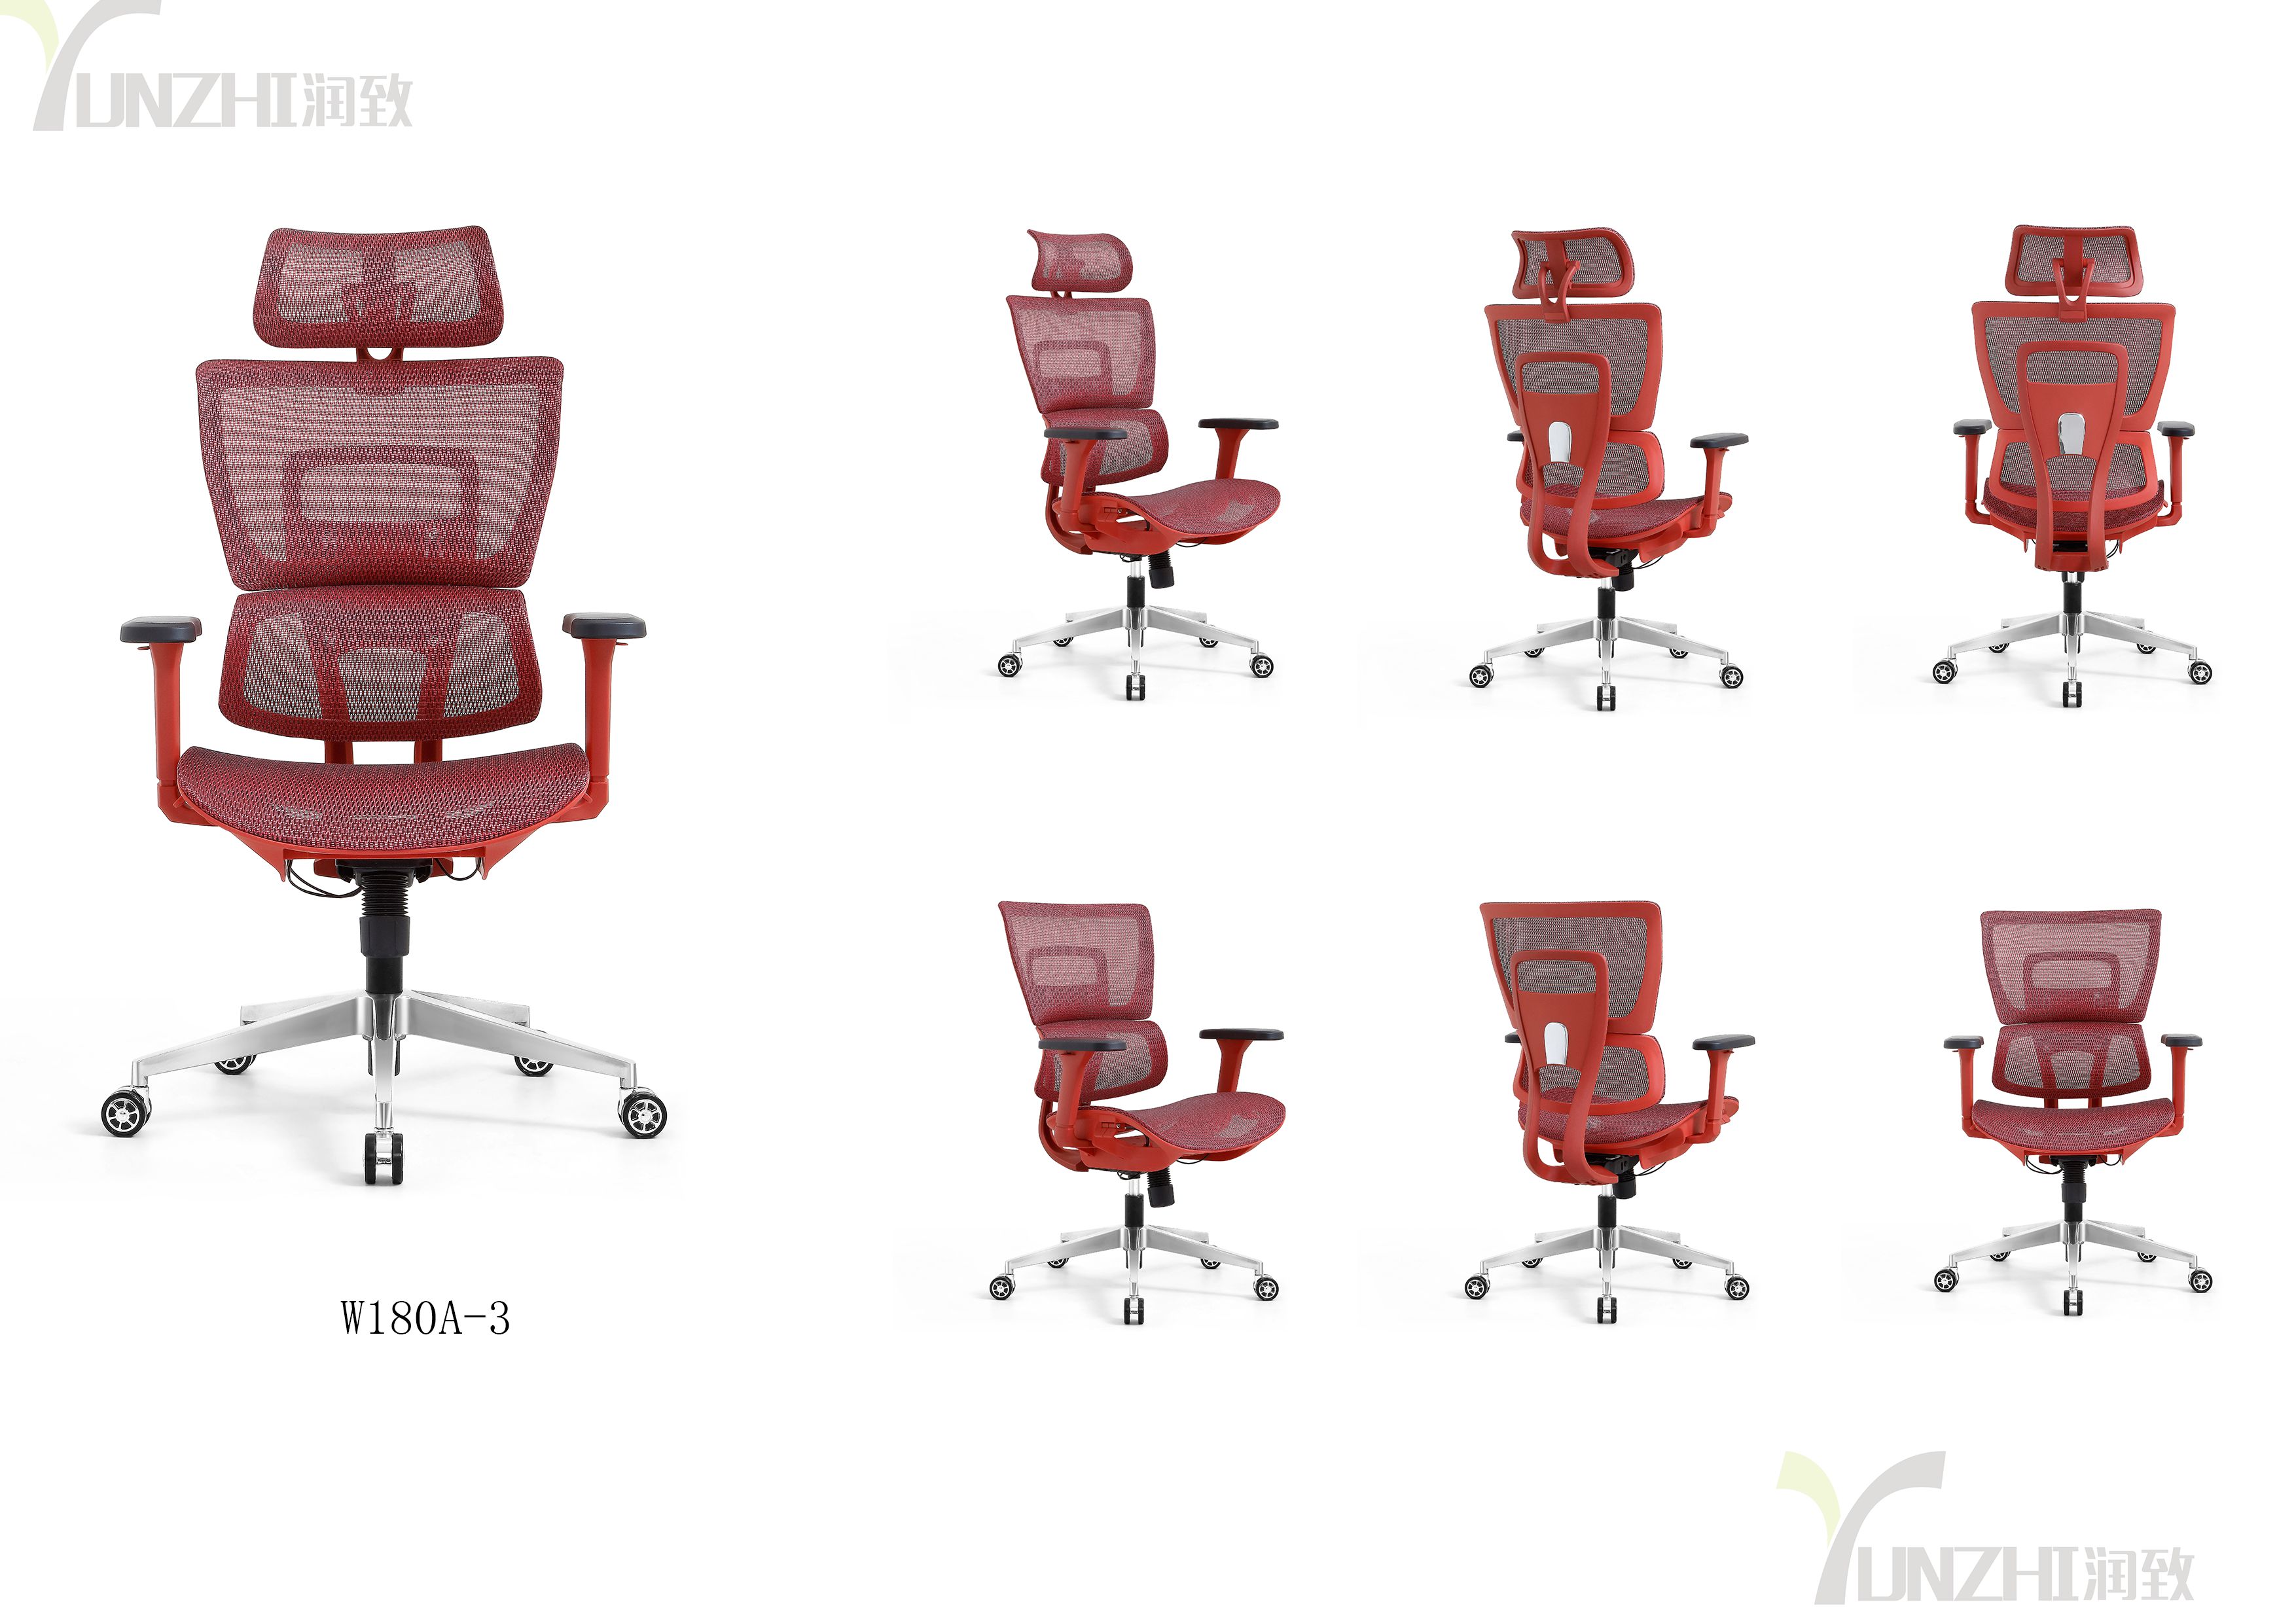 Overview of the Office Chair Industry Chain